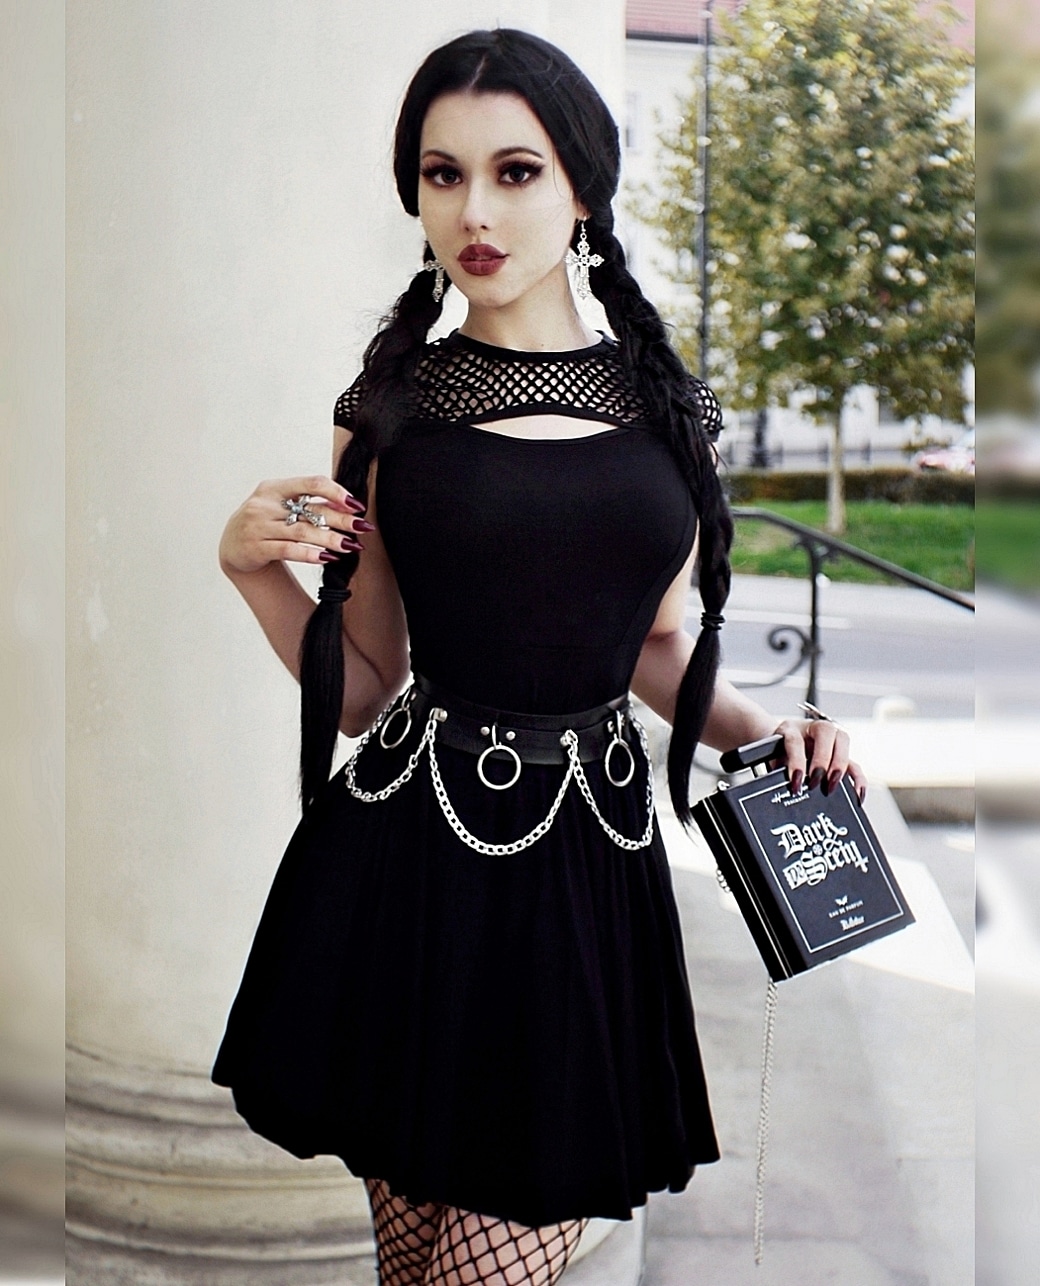 Goth Girl of the Week